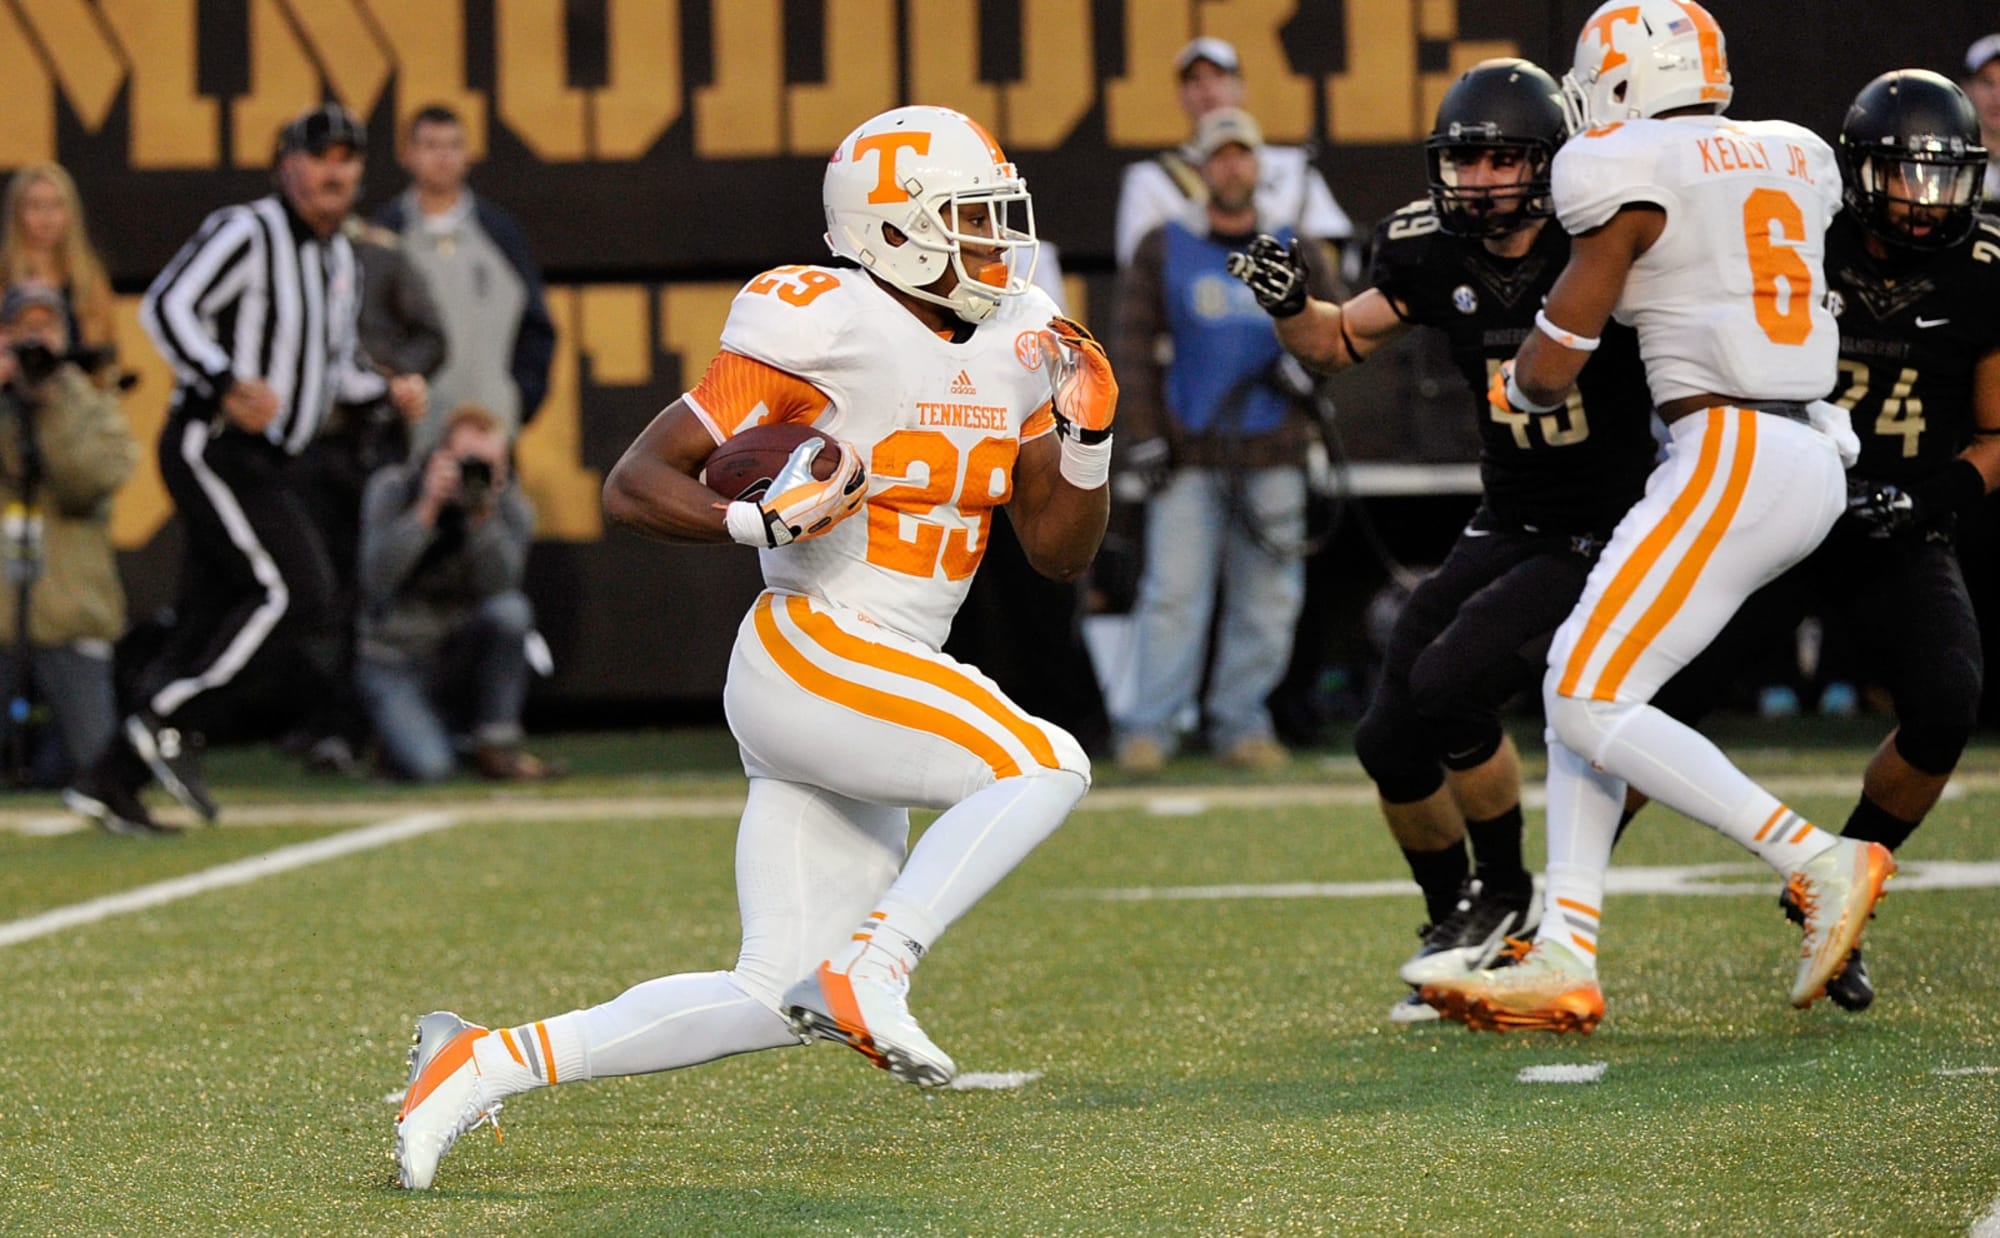 Return of double stripes brings another change to Tennessee's uniforms